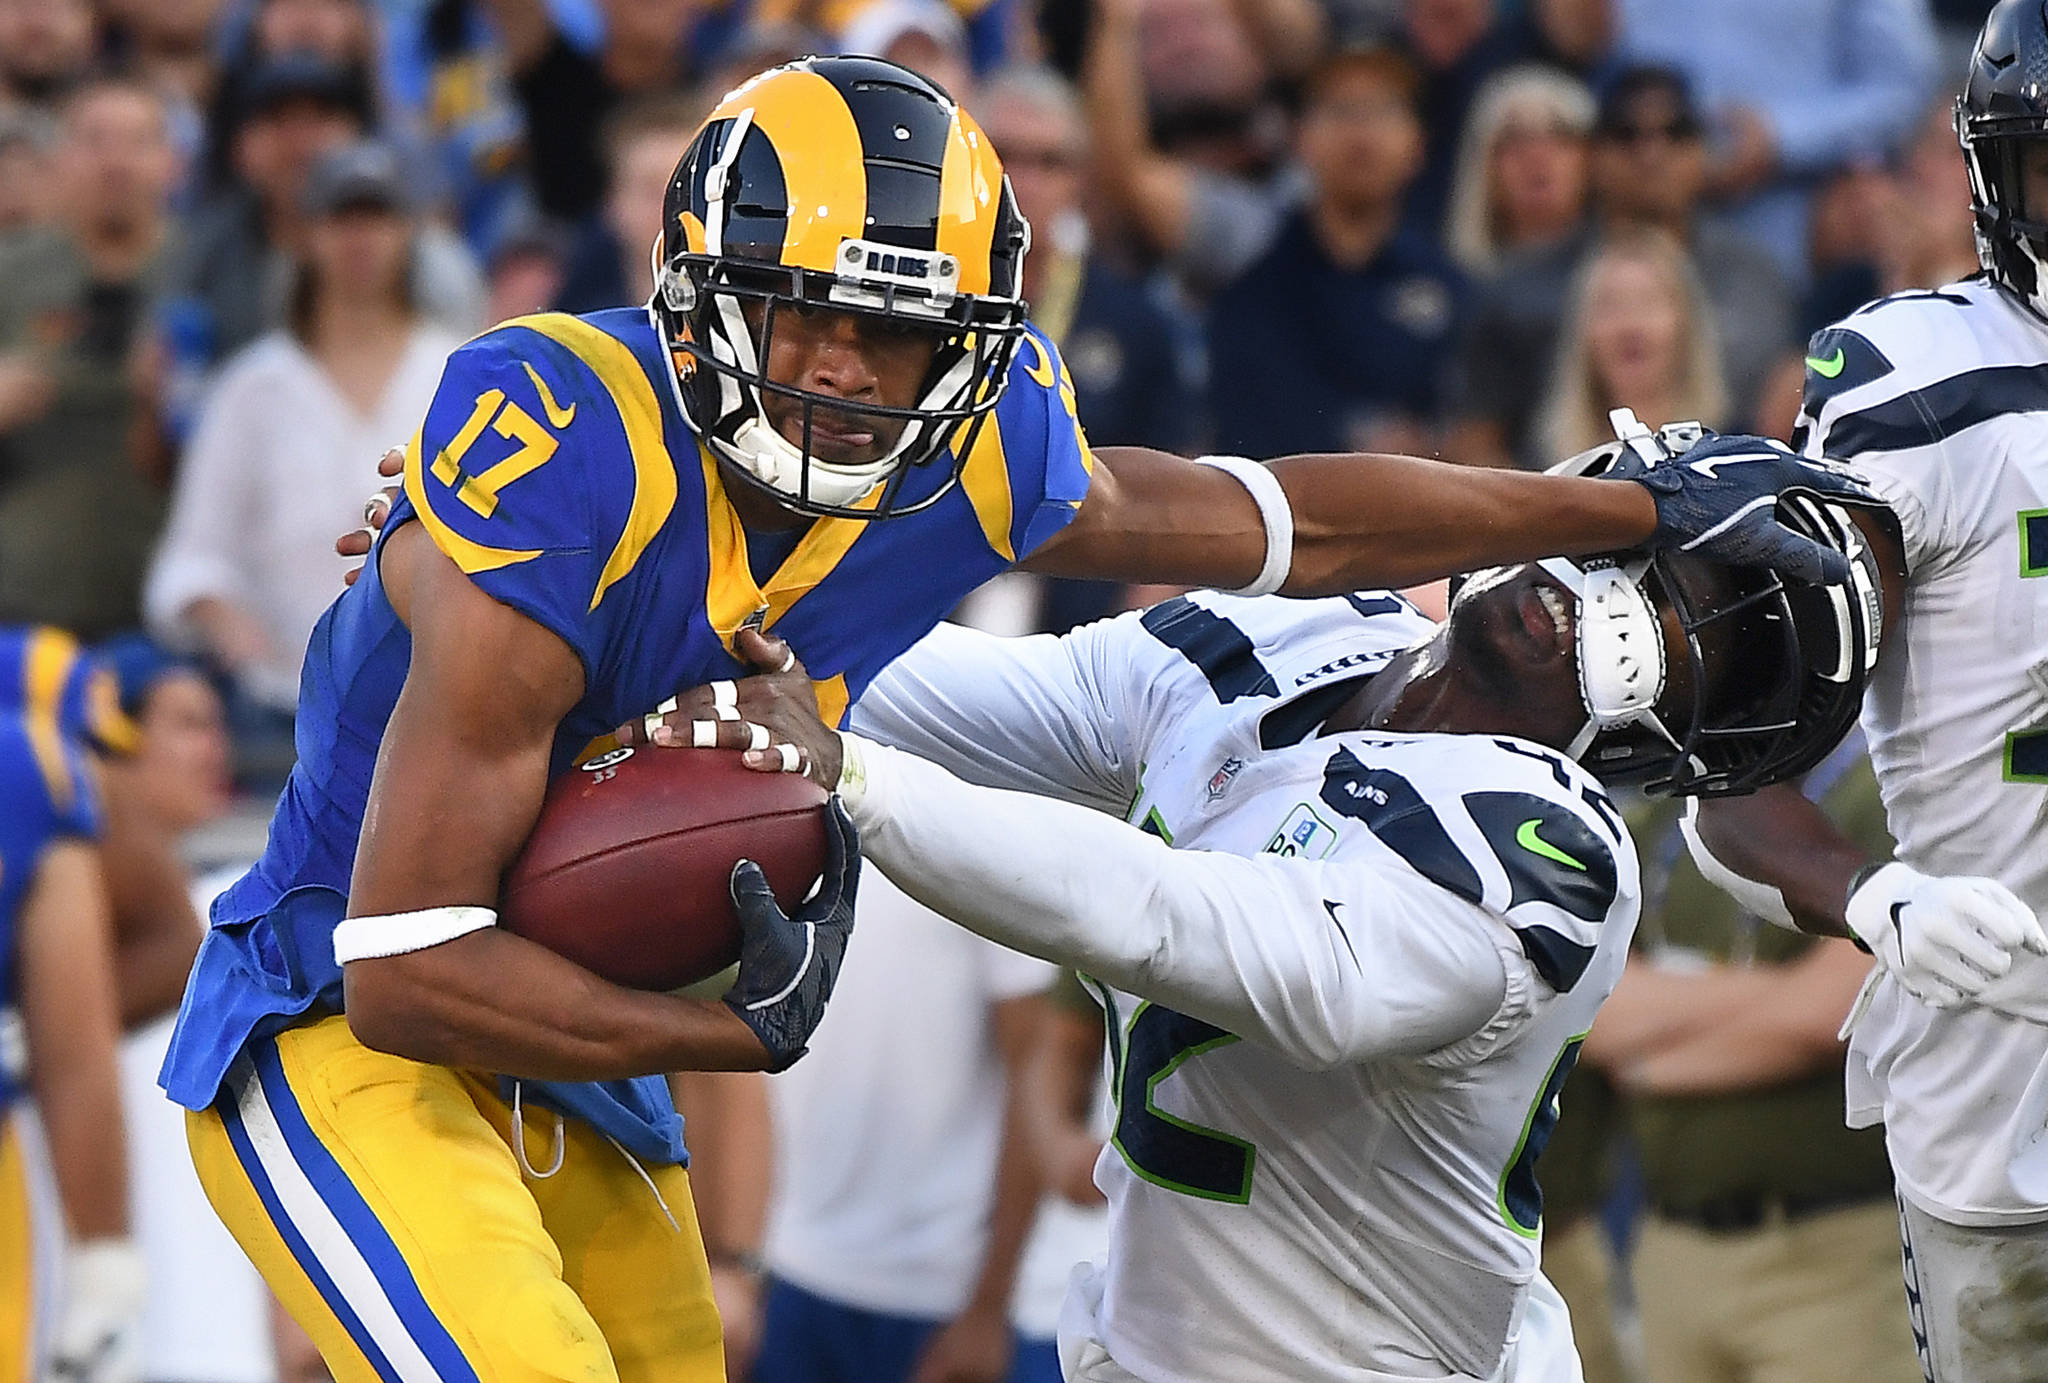 Los Angeles Rams receiver Robert Woods stiff-arms Seattle Seahawks safety Delano Hill to pick up yards in the third quarter on Sunday, Nov. 11, 2018 at the Coliseum in Los Angeles, Calif. (Wally Skalij/Los Angeles Times/TNS)